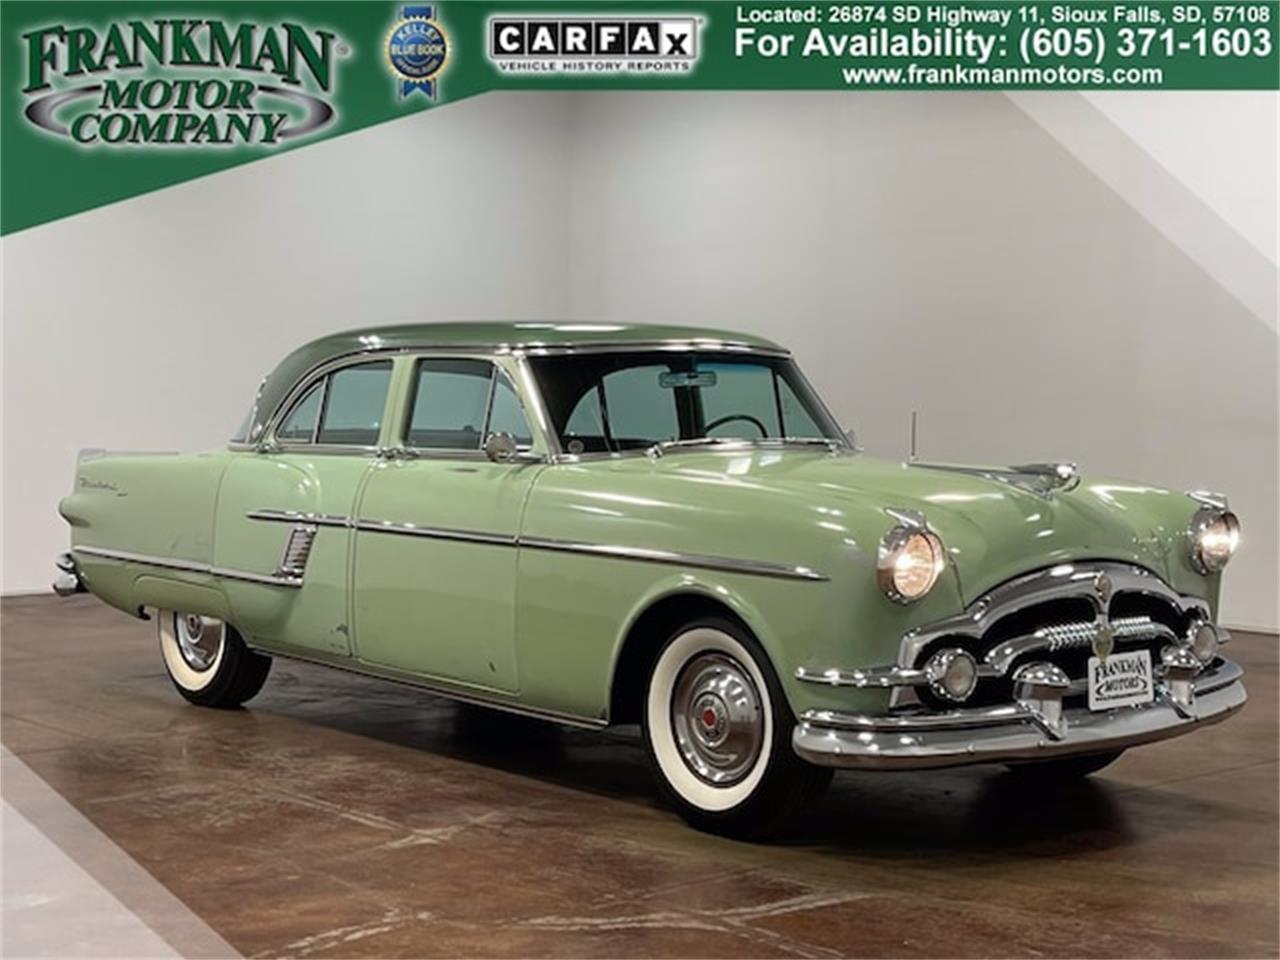 1954 Packard Patrician for sale in Sioux Falls, SD